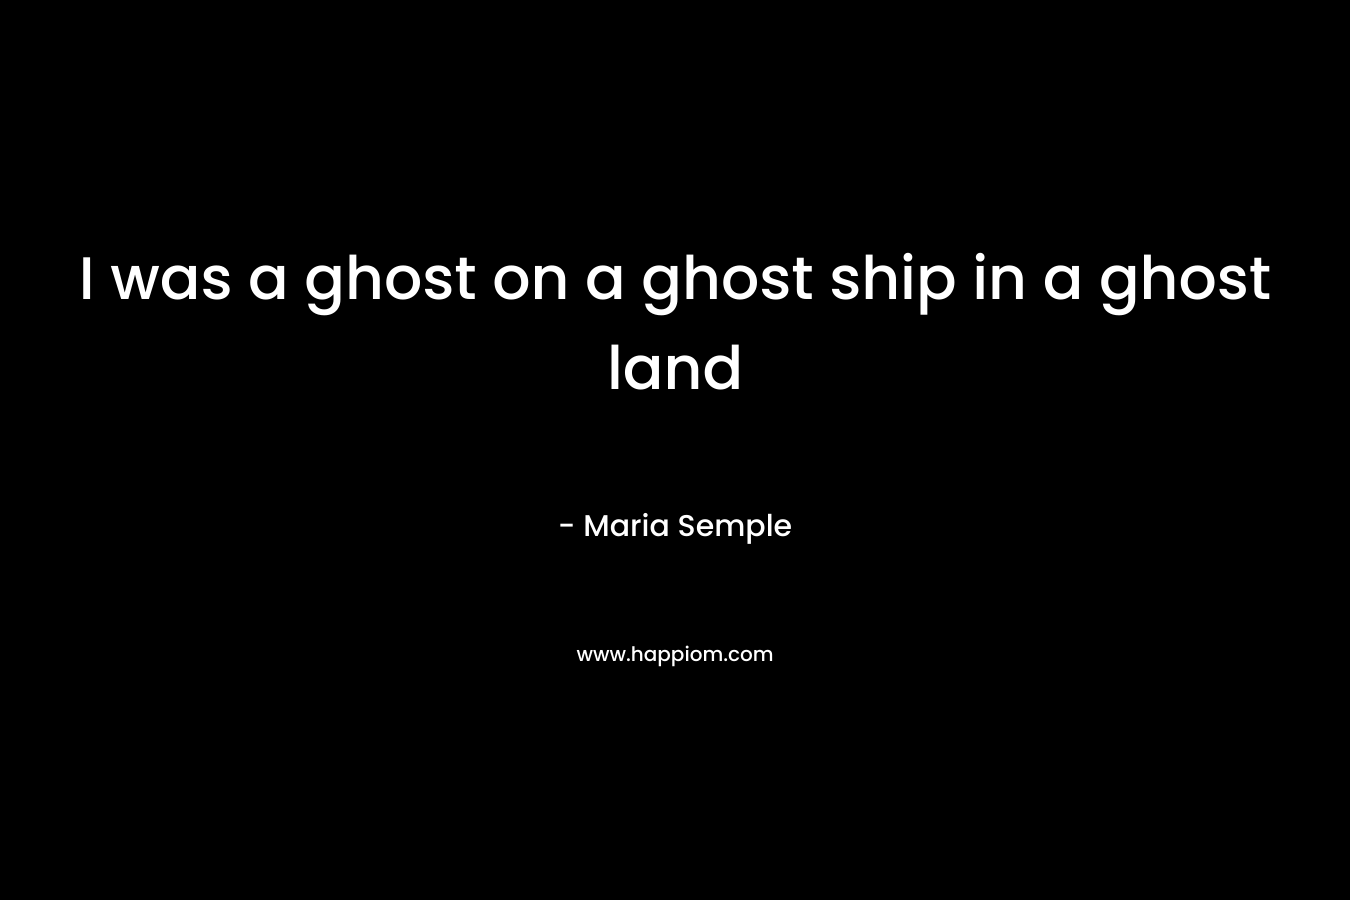 I was a ghost on a ghost ship in a ghost land